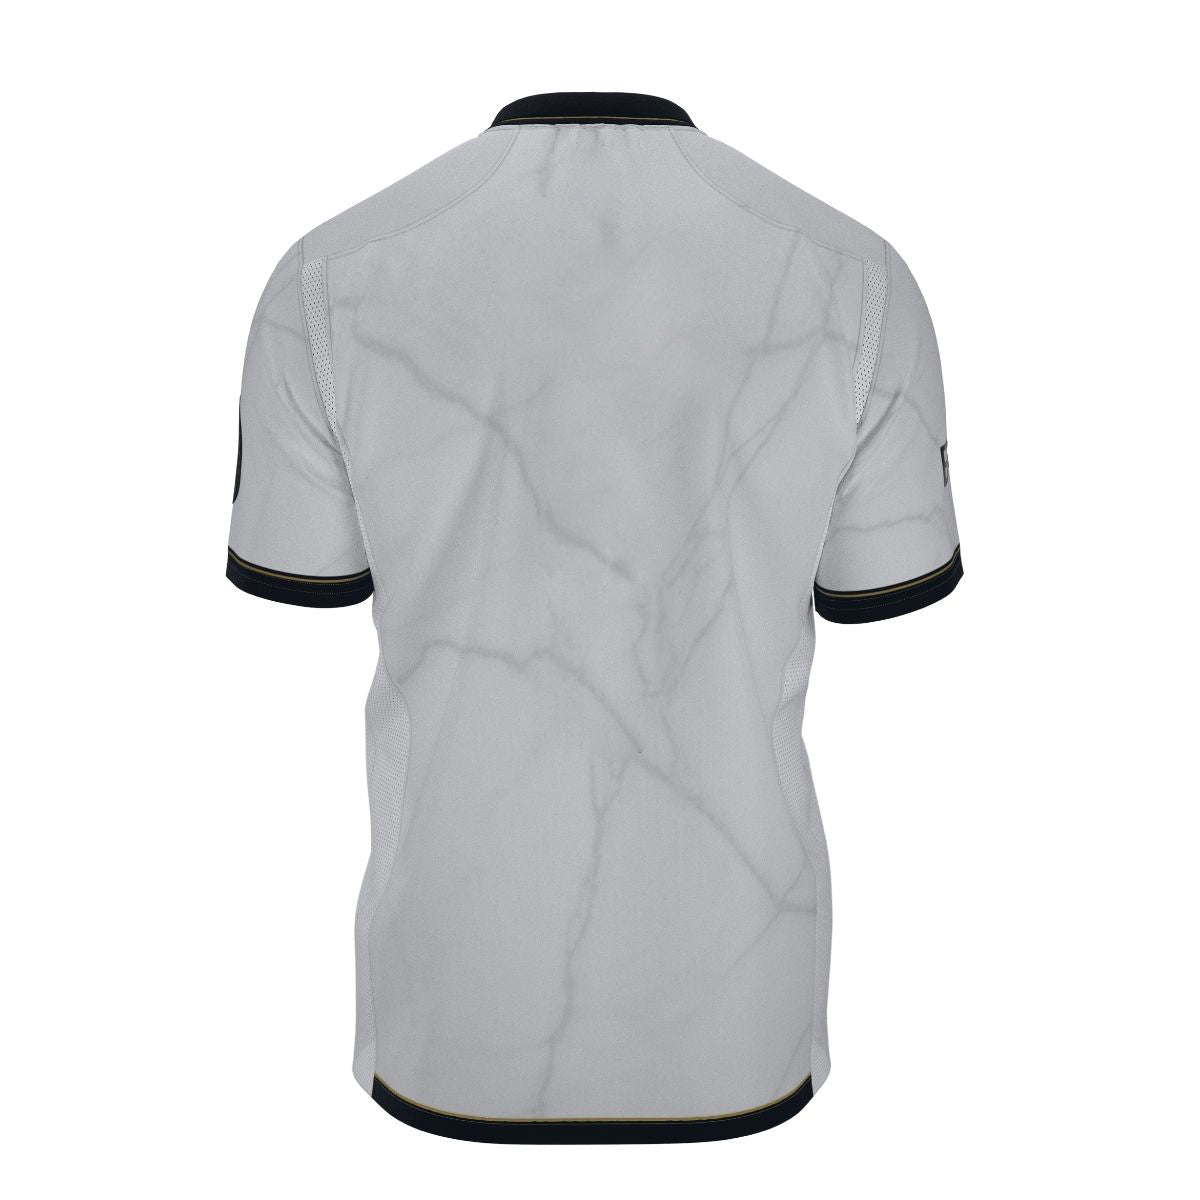 Jersey MAD LIONS blanco hombre - imagen 2